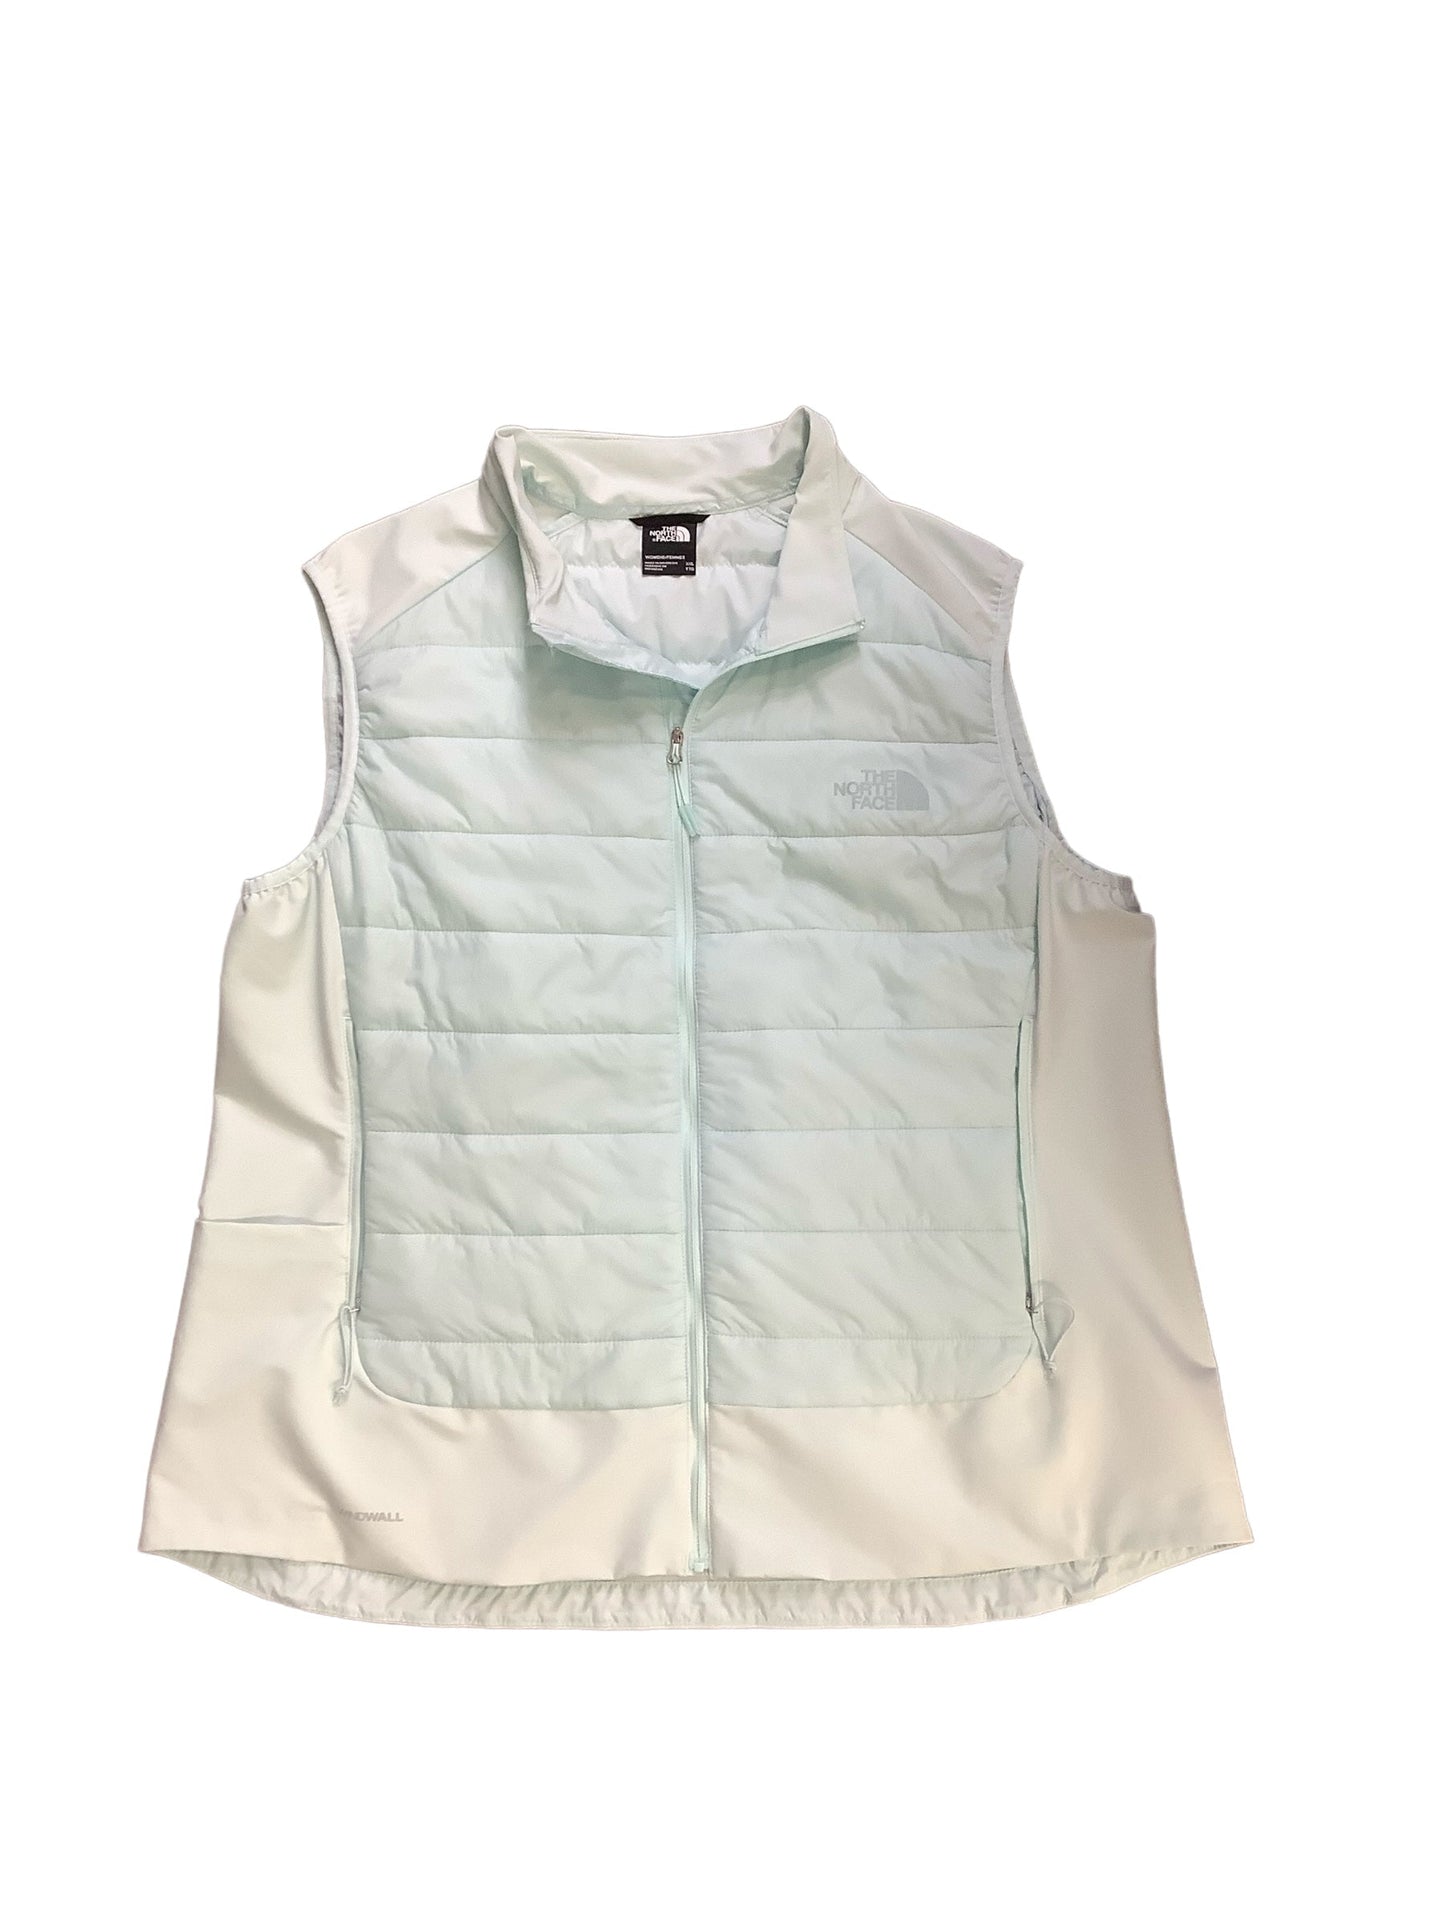 Vest Other By The North Face  Size: 2x